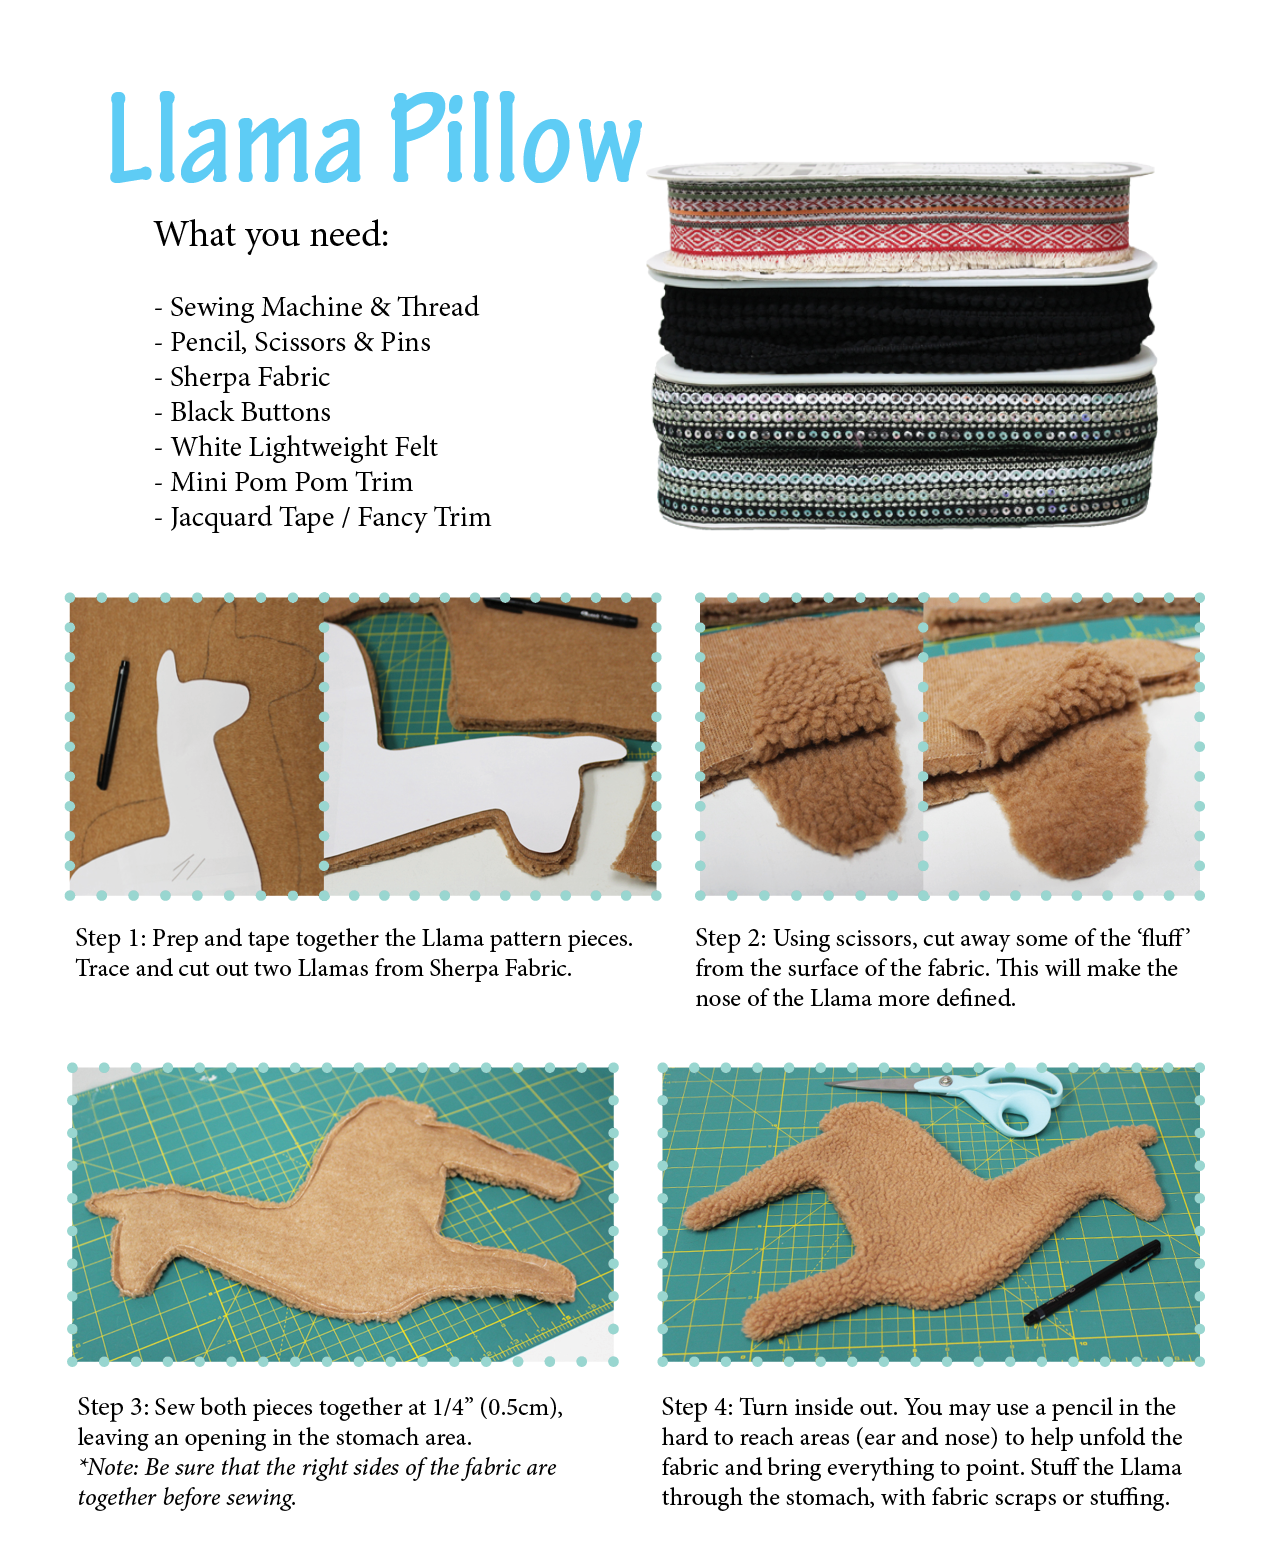 First set of steps to creating your own Llama Pillow